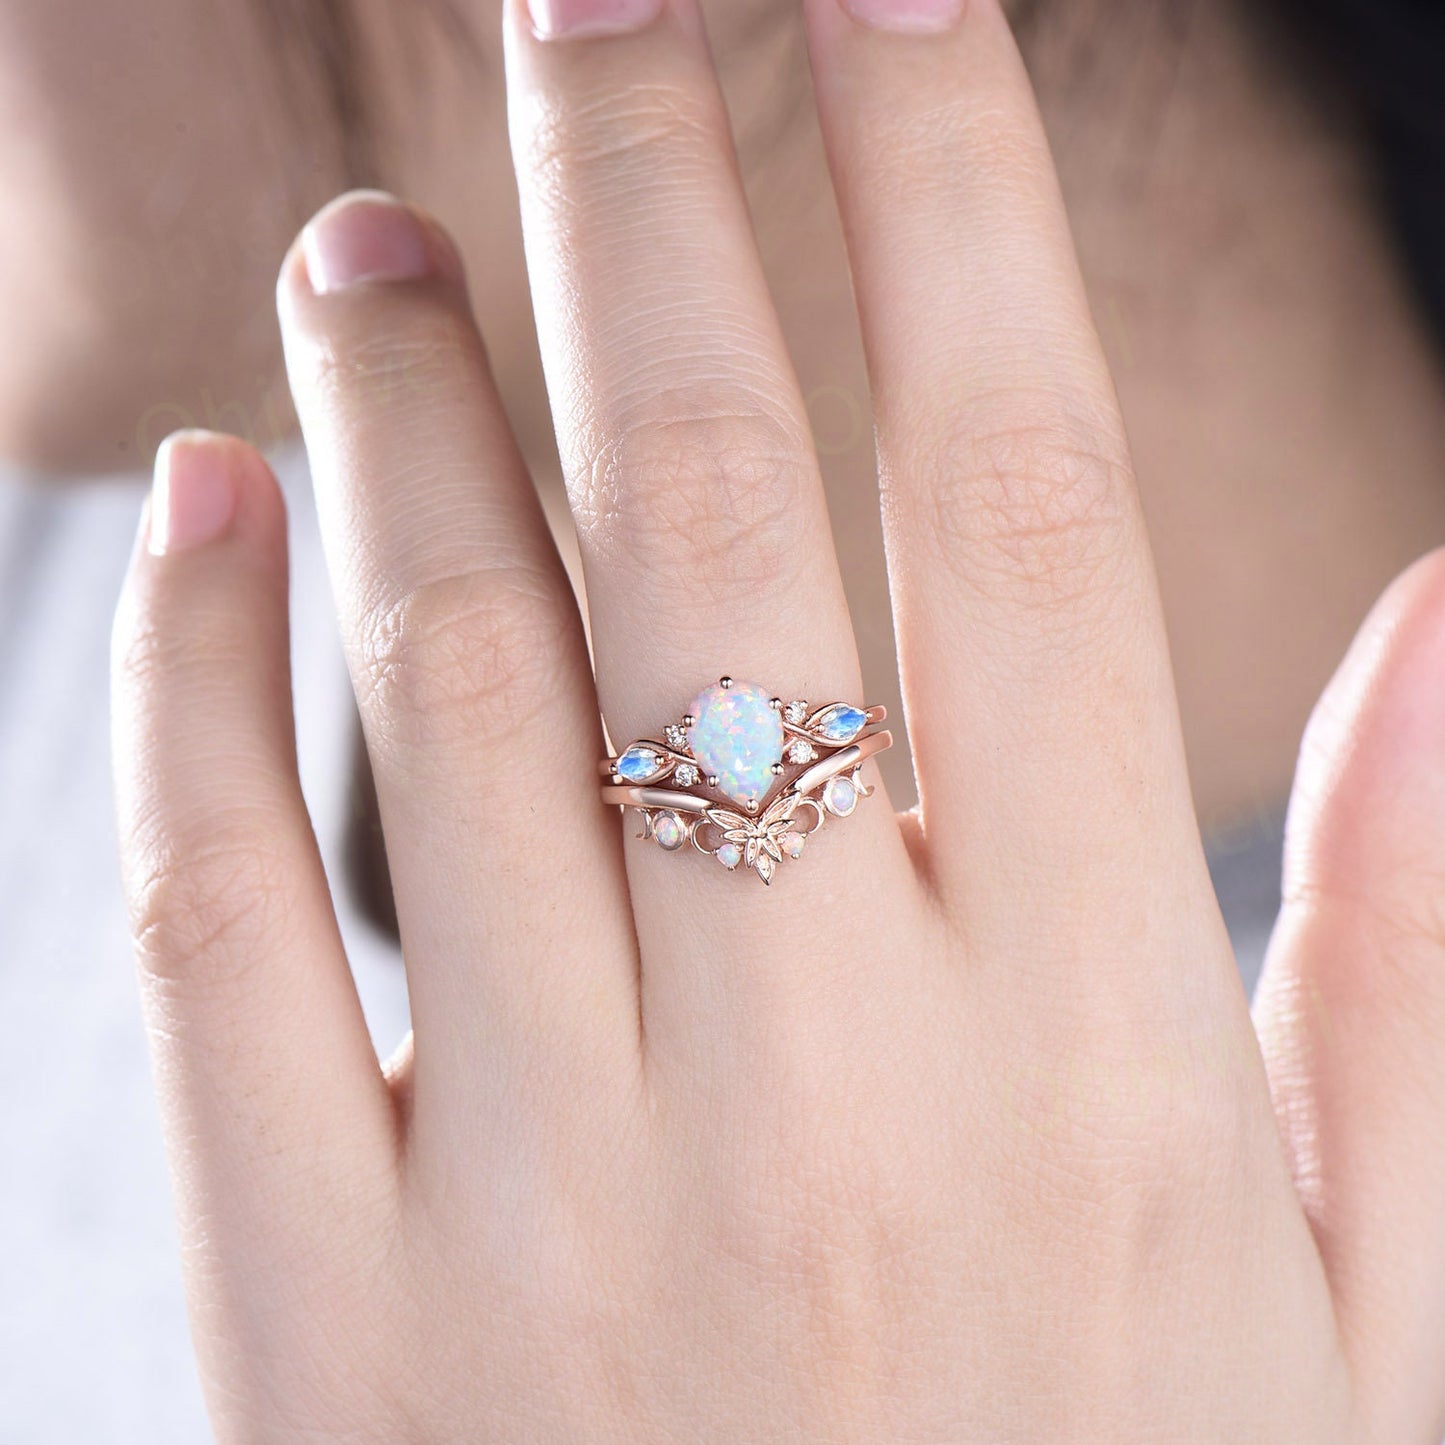 Pear shaped white opal ring vintage unique engagement ring art deco 14k rose gold leaf moonstone ring women twisted promise ring set gift